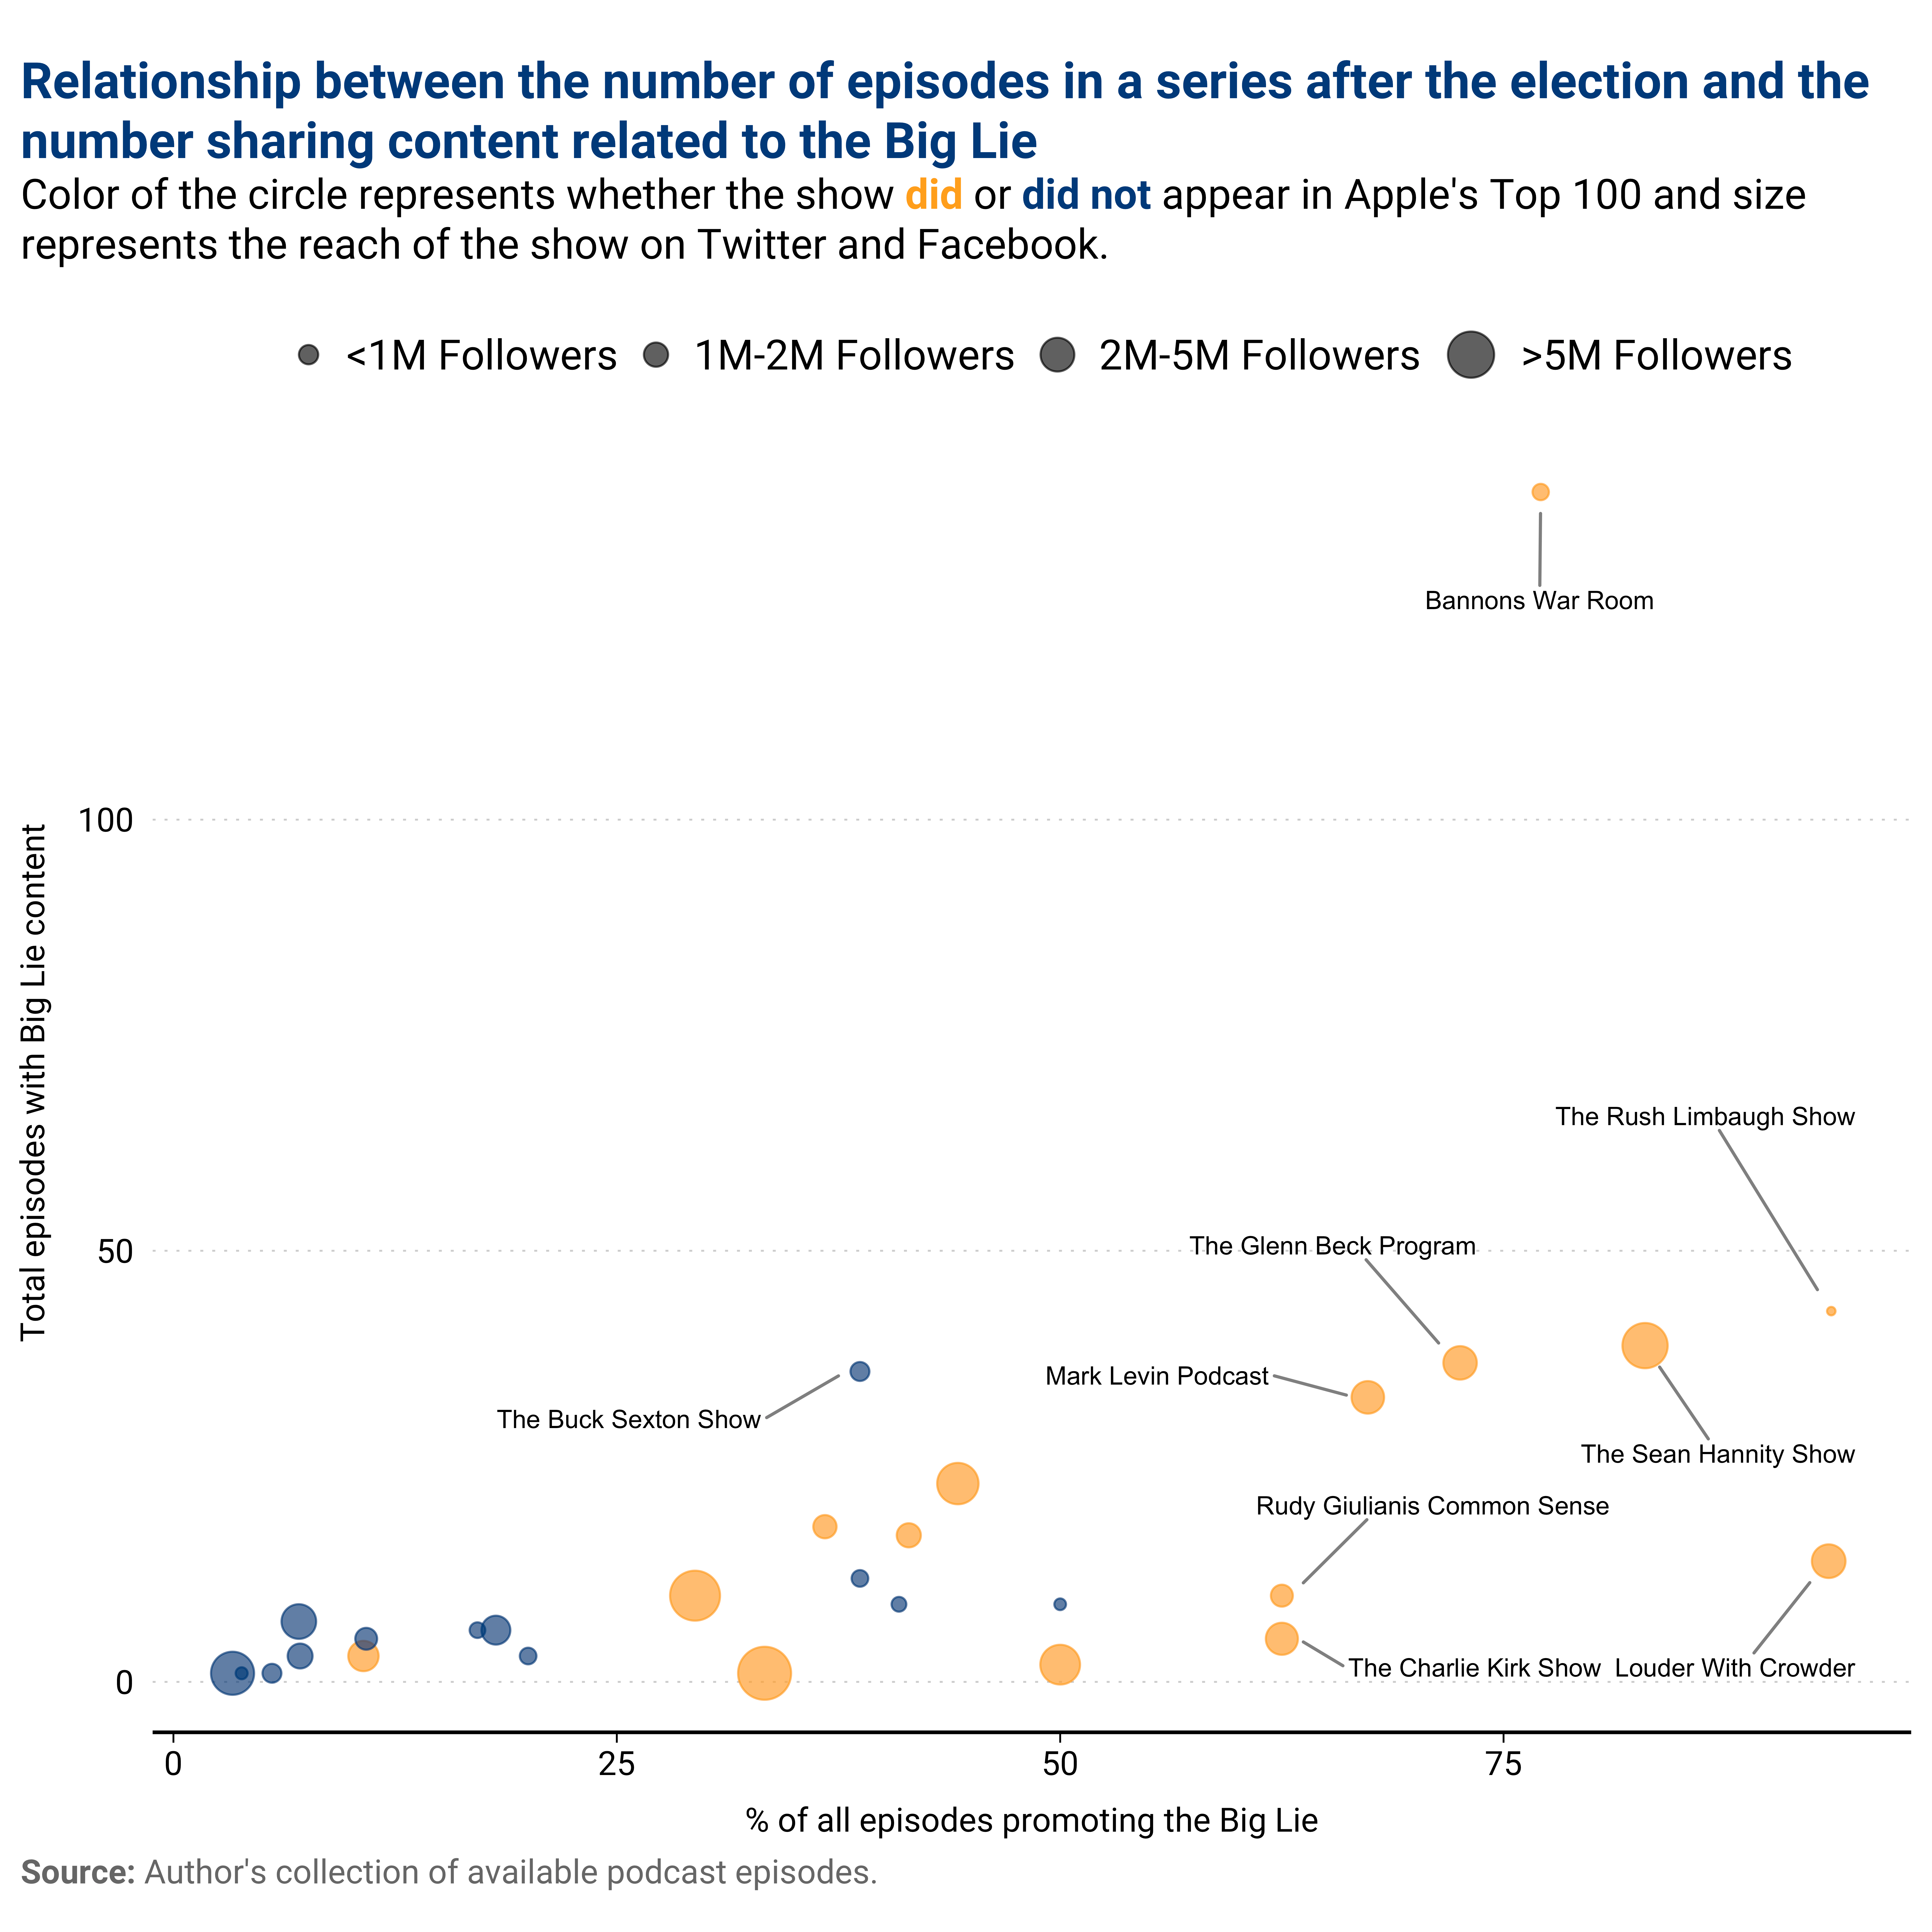 Figure: Much of the content tied to election fraud was driven by a few shows that both aired a high number of episodes and shared misleading narratives tied to election integrity frequently. Although 29 series shared unsubstantiated or false claims, 10 series shared either 25 or more claims or devoted more than 50% of their post-election episodes to election fraud.